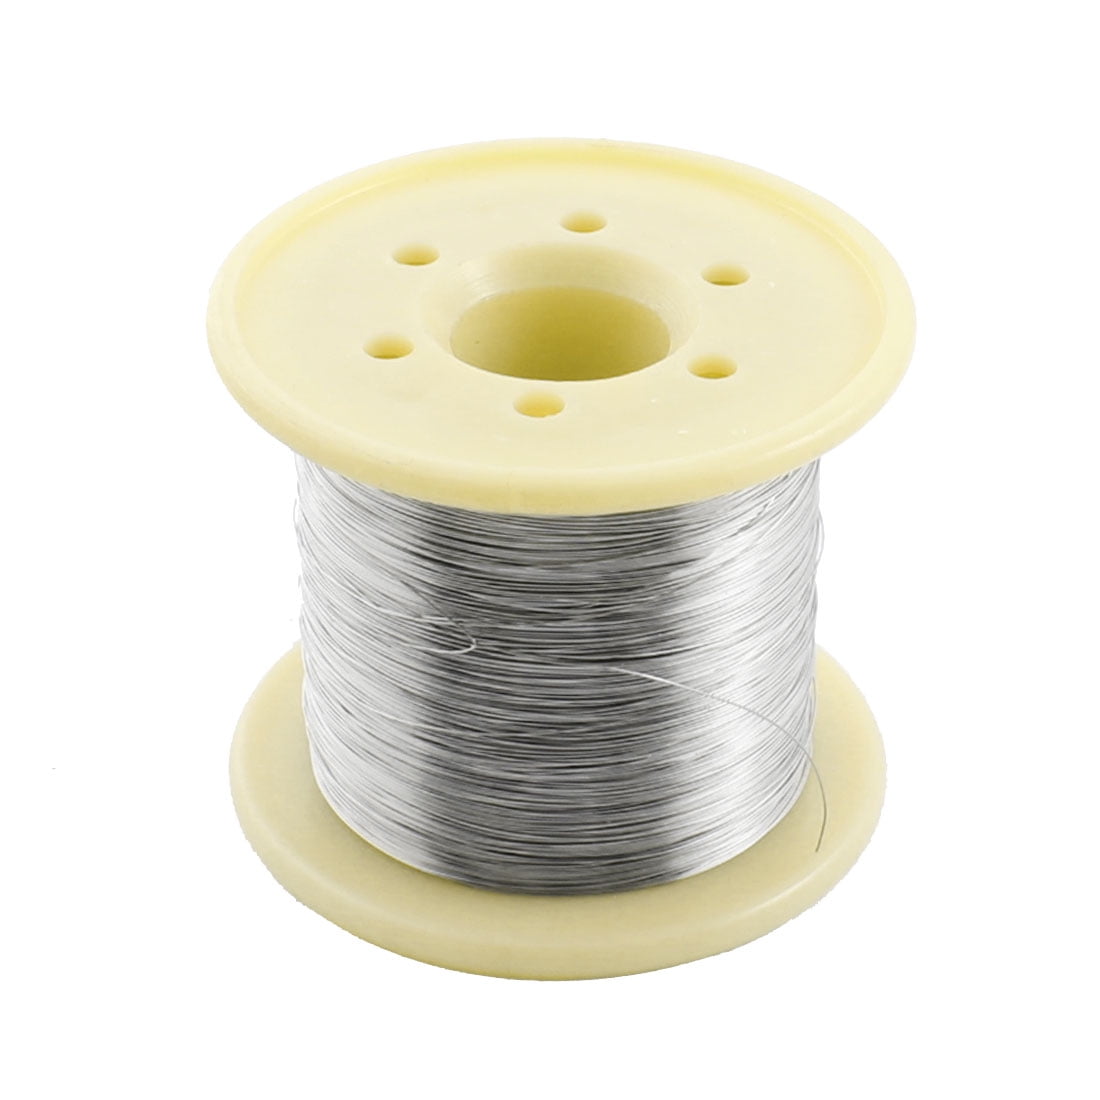 33 AWG 1.5 lb Nichrome 60 resistance wire. - TEMCo Industrial